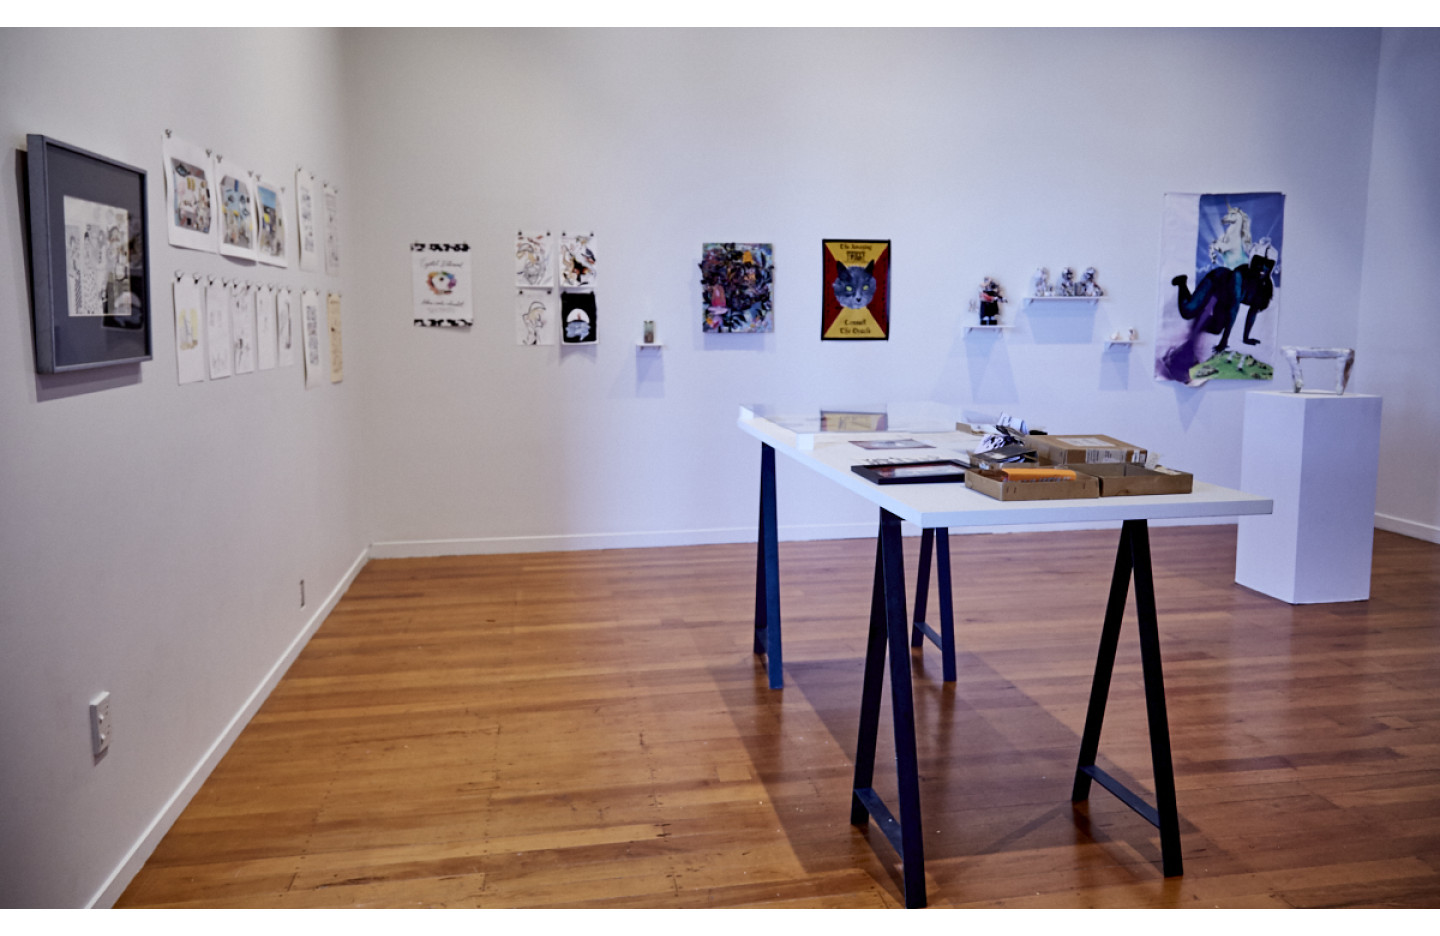 ThreeD Words: An exhibition of NZ women comic makers, Ramp Gallery, 31 Oct - 15 Nov, 2016